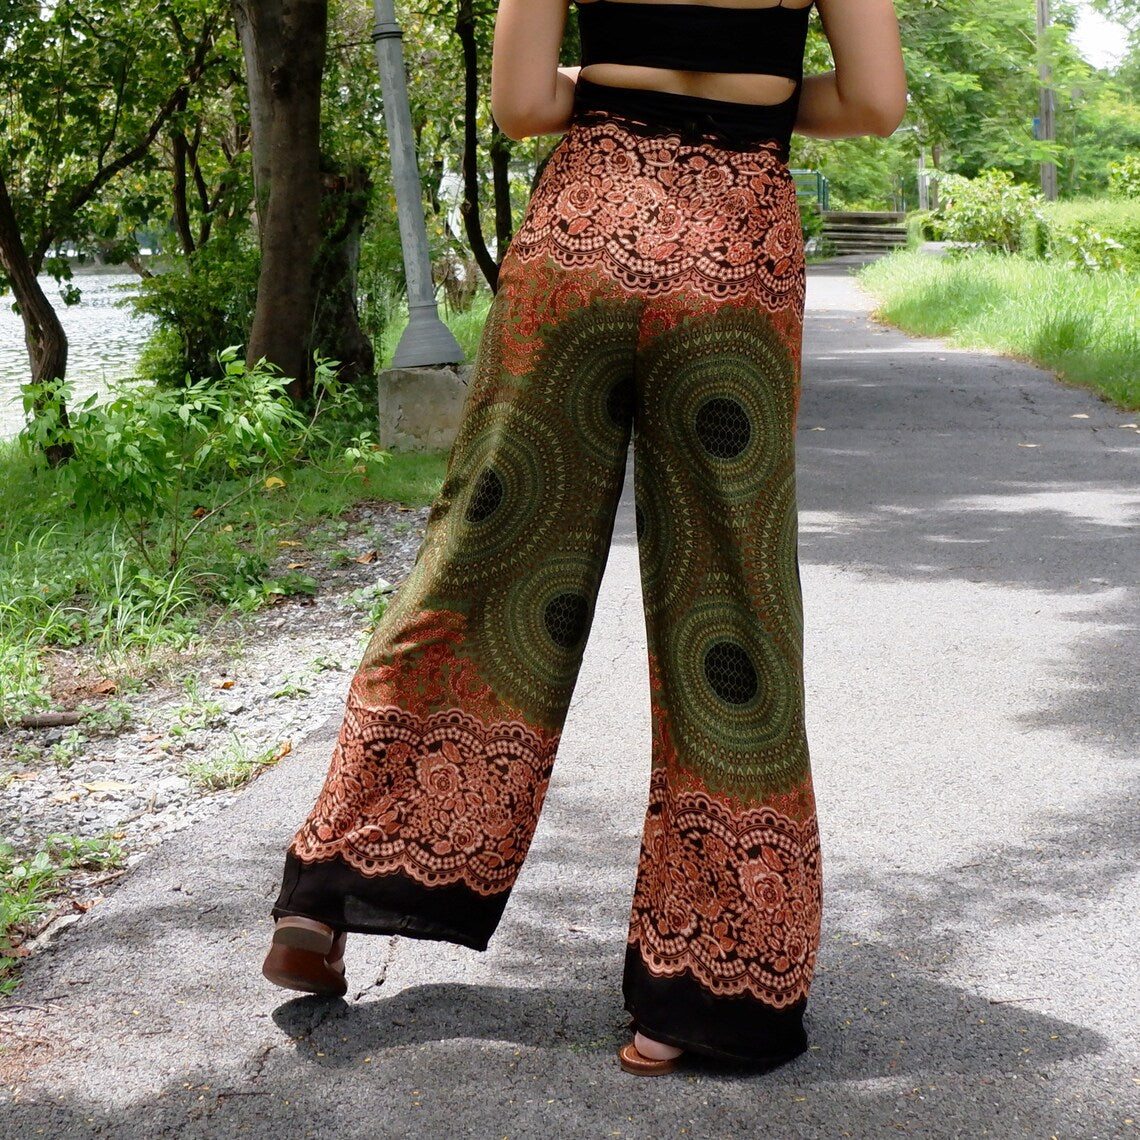 Fashion-forward boho beach wrap pants with detailed patterns, perfect for a summer getaway.